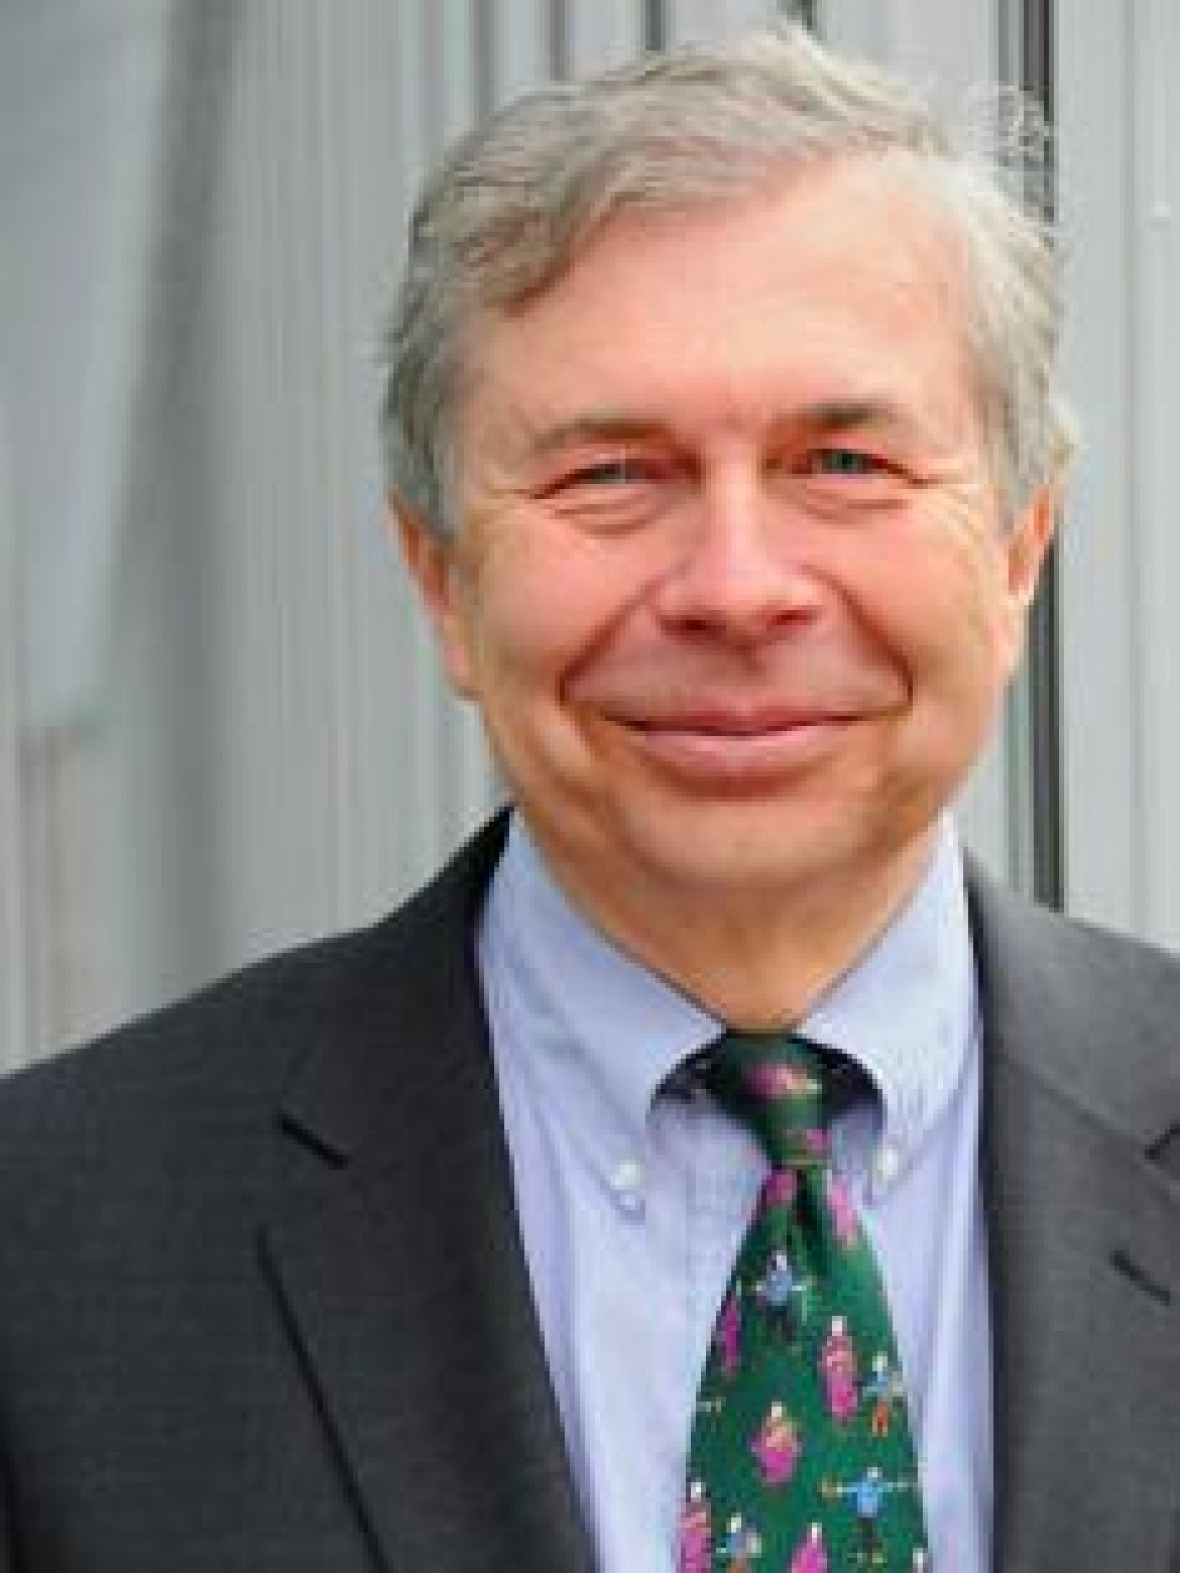 Before he joined the Climate Service Center, Guy Brasseur headed the Earth and Sun Systems Laboratory in Boulder, Colorado. From 1999 to 2005 he was also Director of the Max Planck Institute for Meteorology and head of the German Climate Computing Center in Hamburg. He is one of the main authors of the IPCC Fourth Assessment Report, for which the Nobel Peace Prize was awarded in 2007.